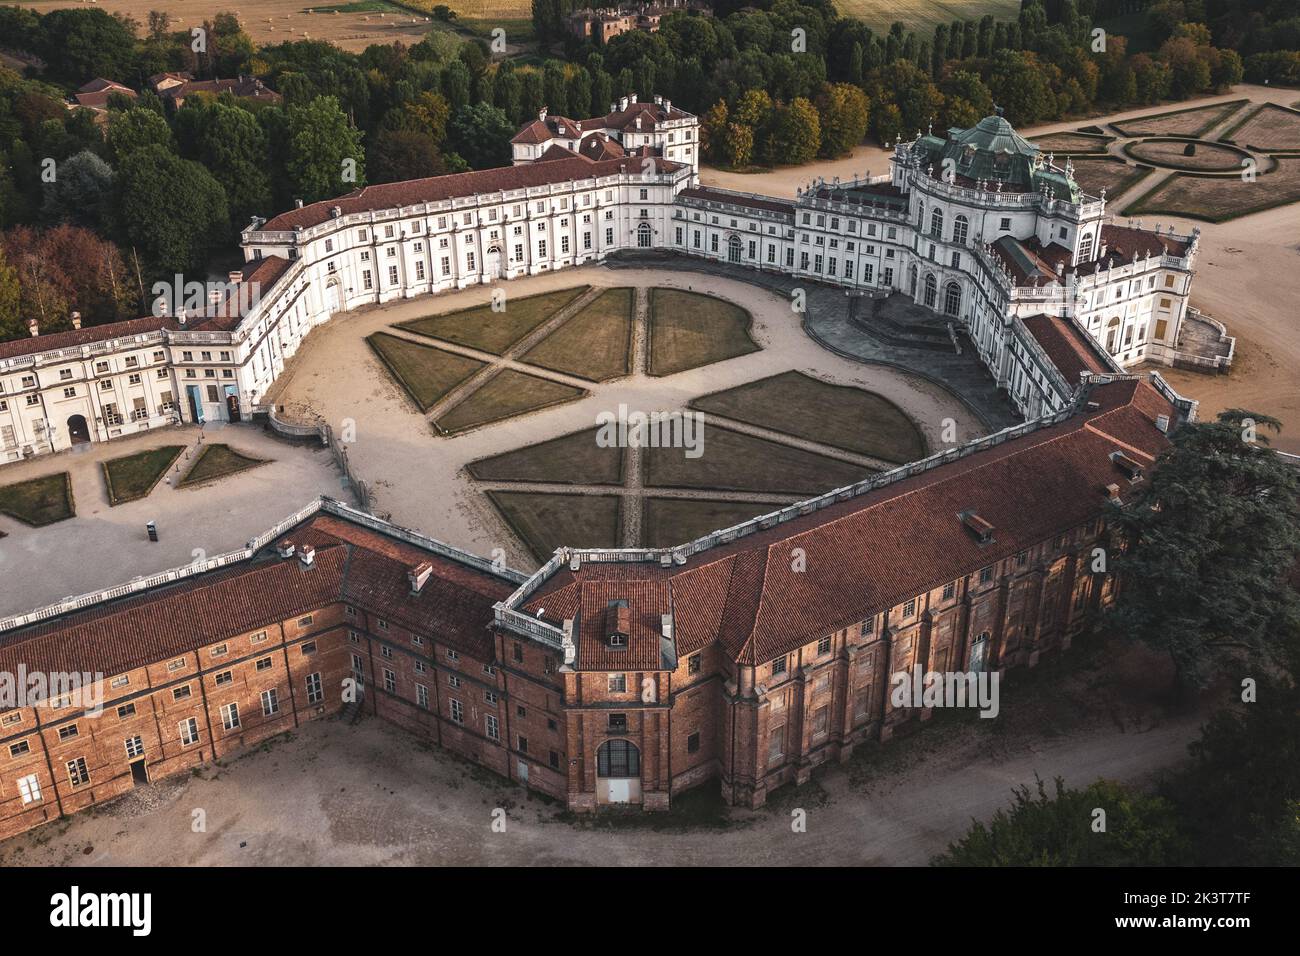 ITALY, TORINO, 2022: The Palazzina di caccia of Stupinigi is one of the Residences of the Royal House of Savoy in northern Italy, part of the UNESCO World Heritage Sites list. Built as a royal hunting lodge in the early 18th century, it is located in Stupinigi. Stock Photo